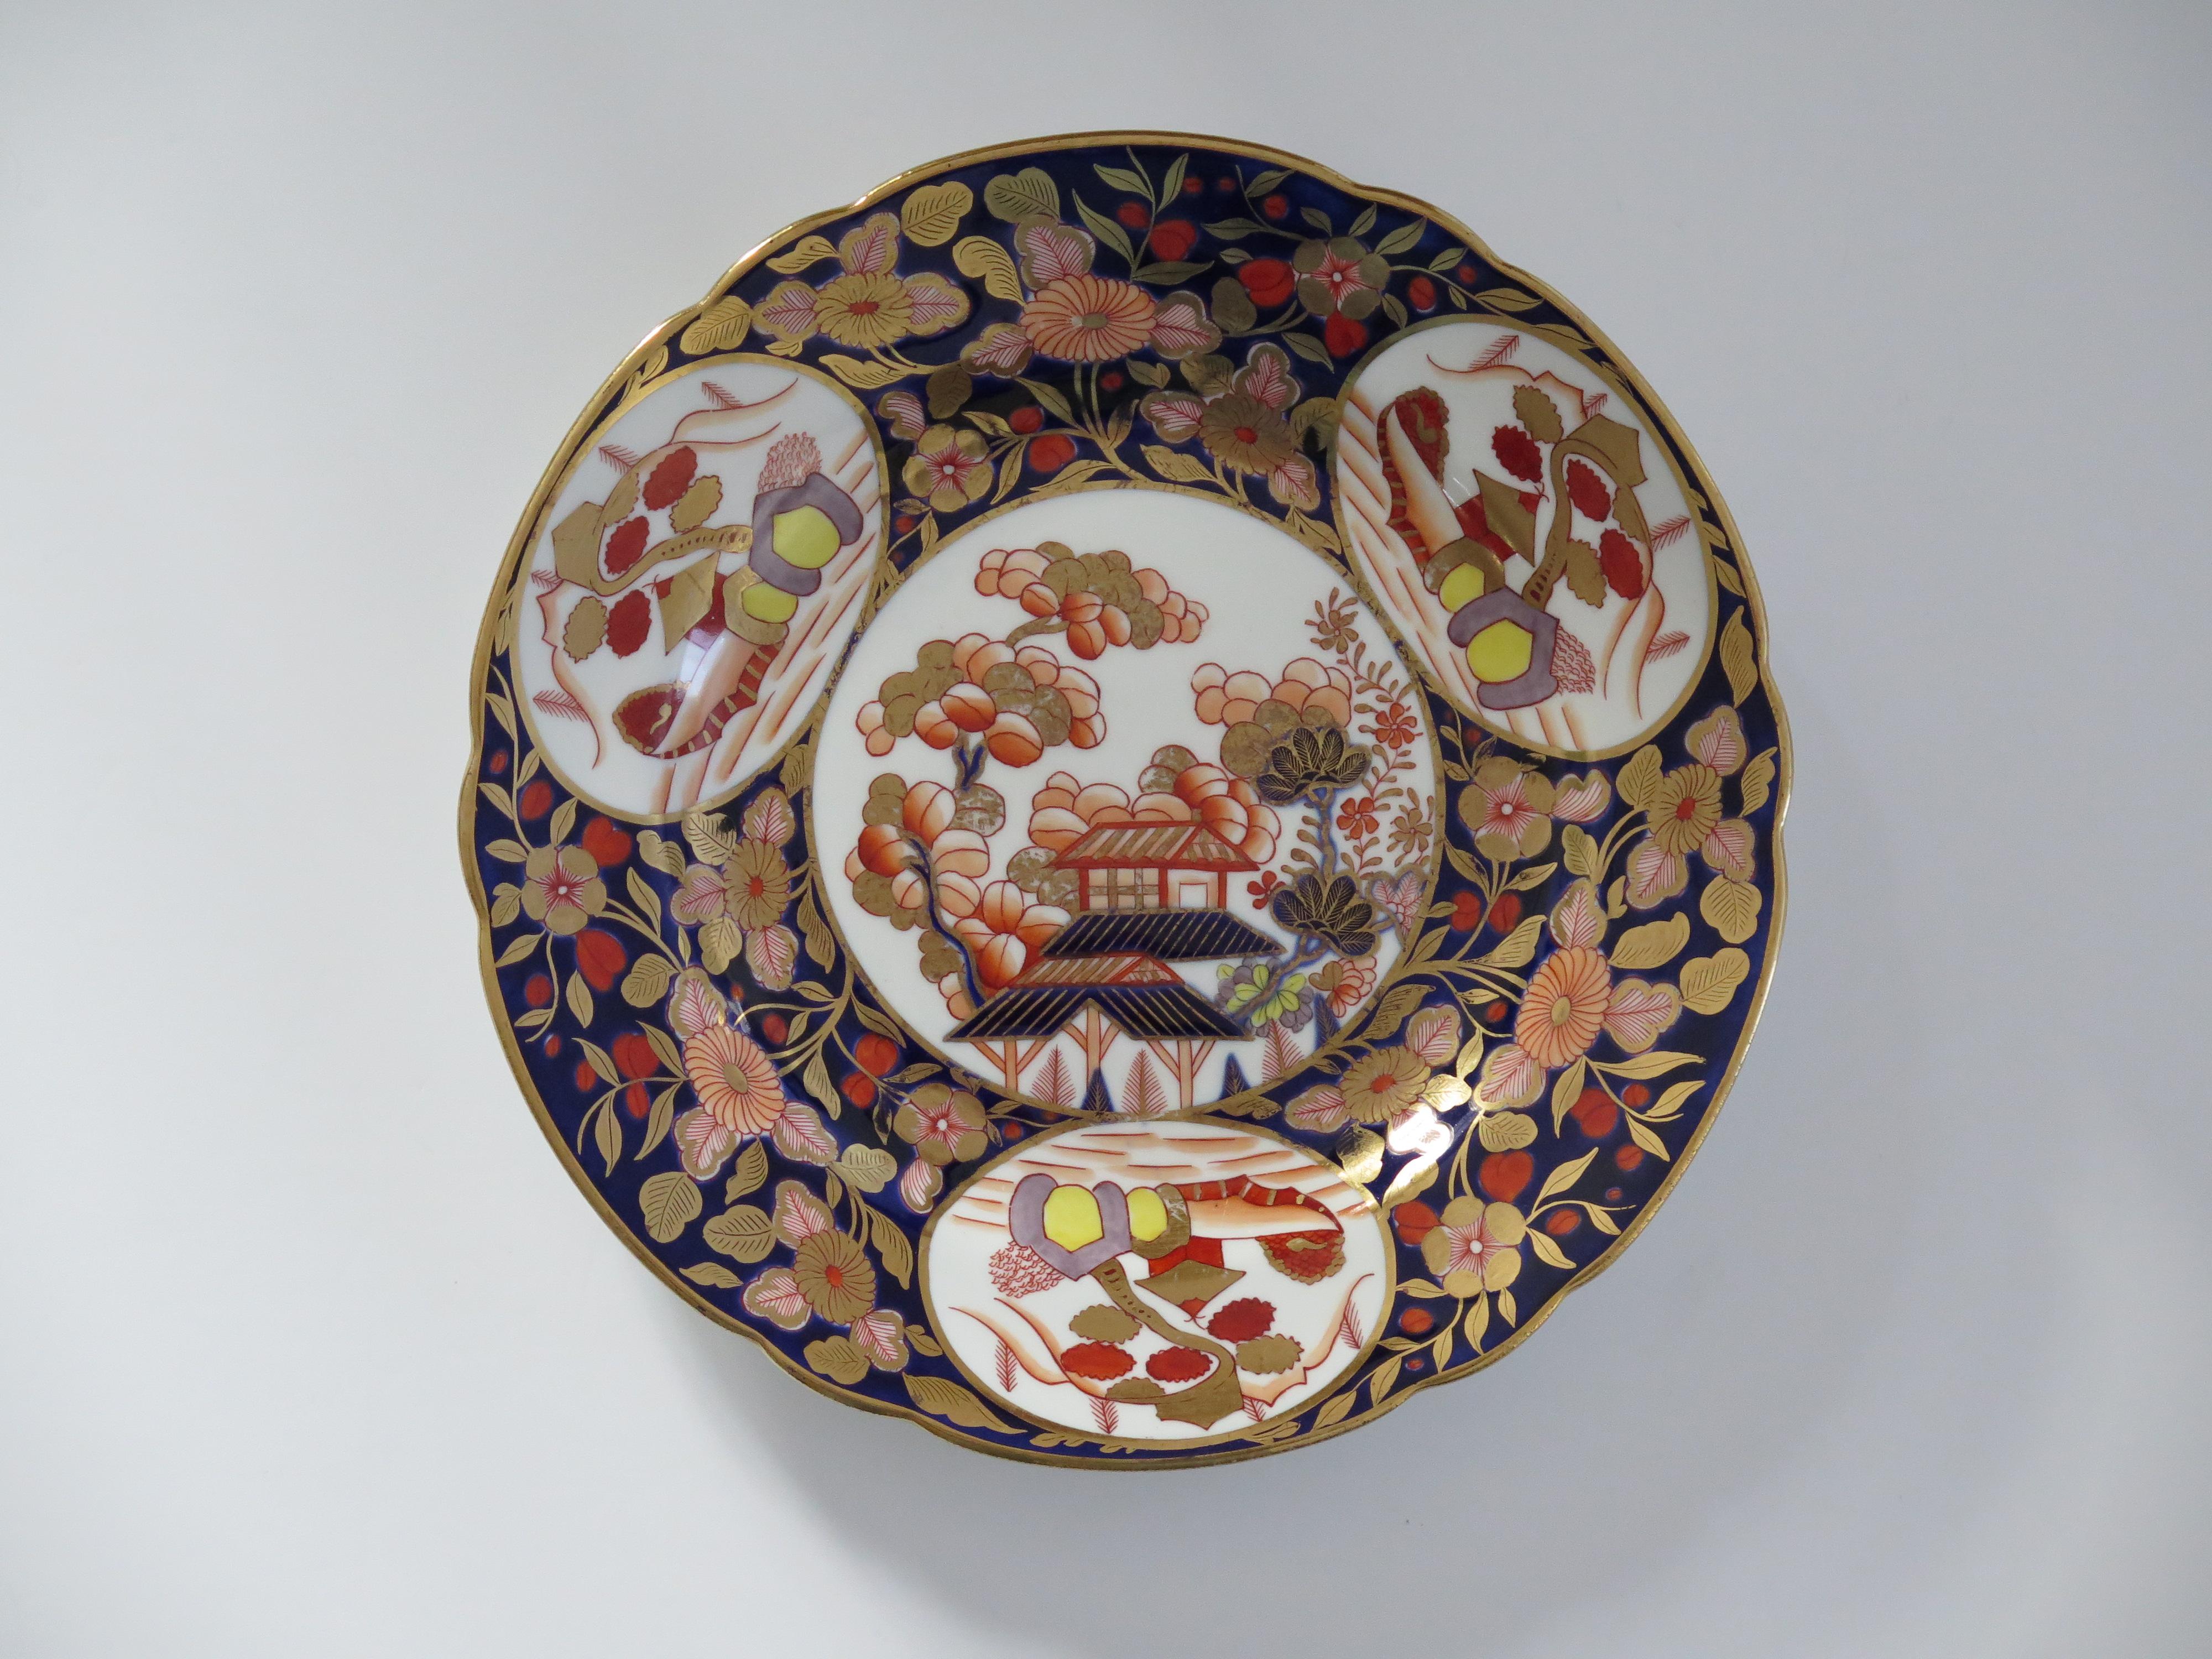 This is a fine example of an English George III period, Coalport Desert Plate, hand painted in pattern 1949 and dating from the early 19th century, circa 1810.

The Plate is well potted on a low foot with a wavy rim. 

It is beautifully hand